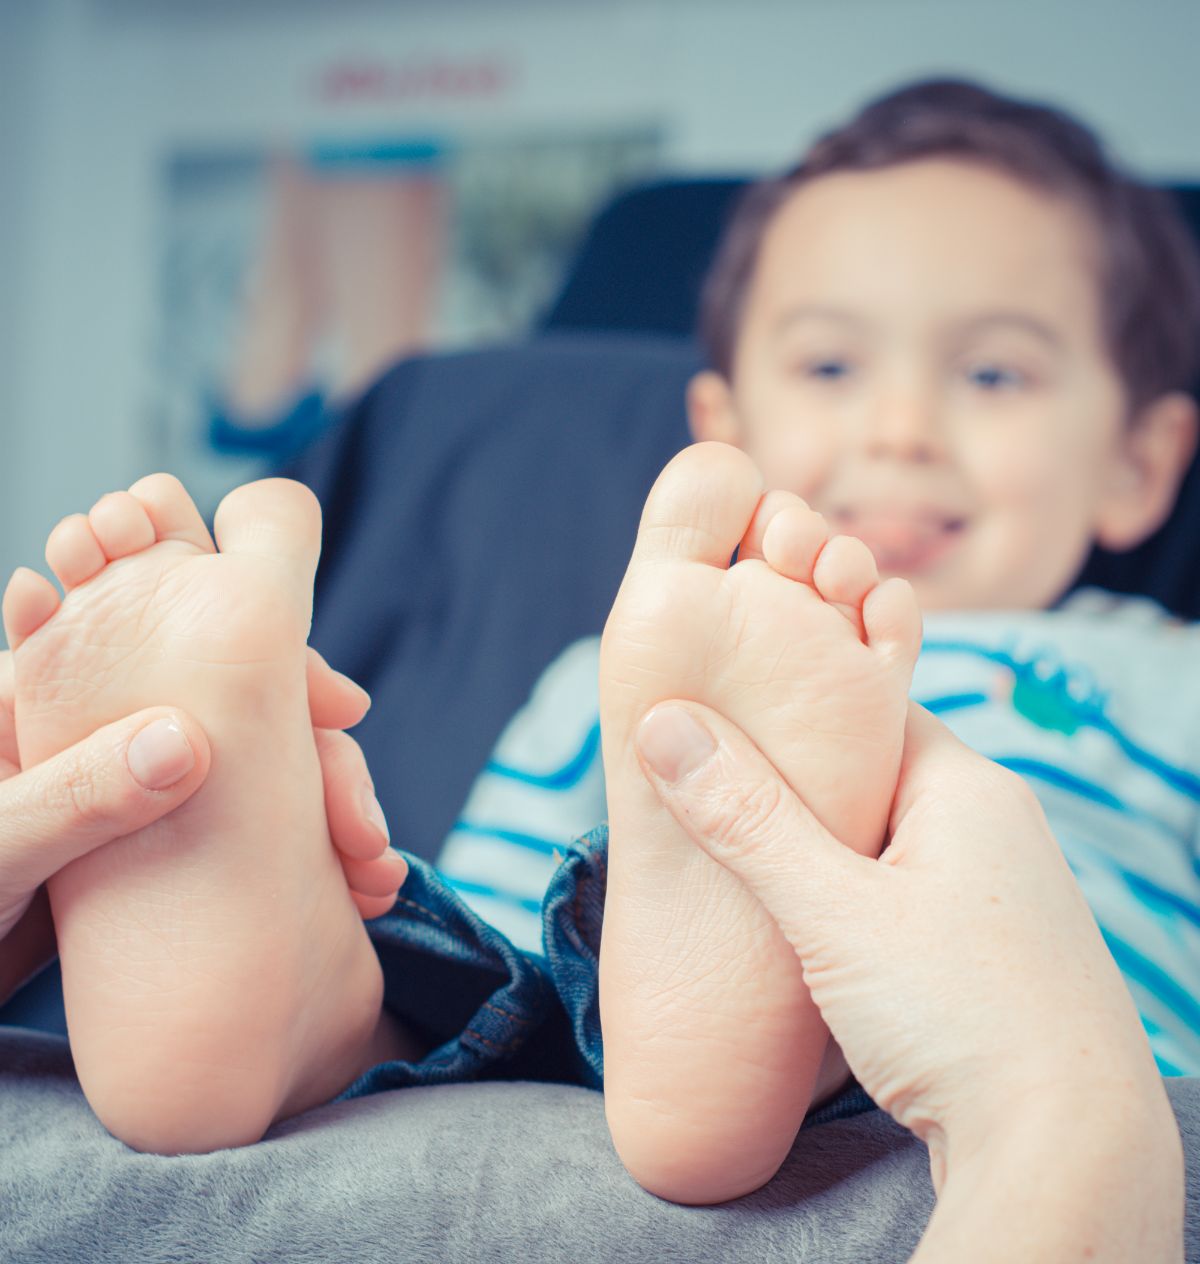 A young boy lays back on a bed while his feet are massaged by adult hands